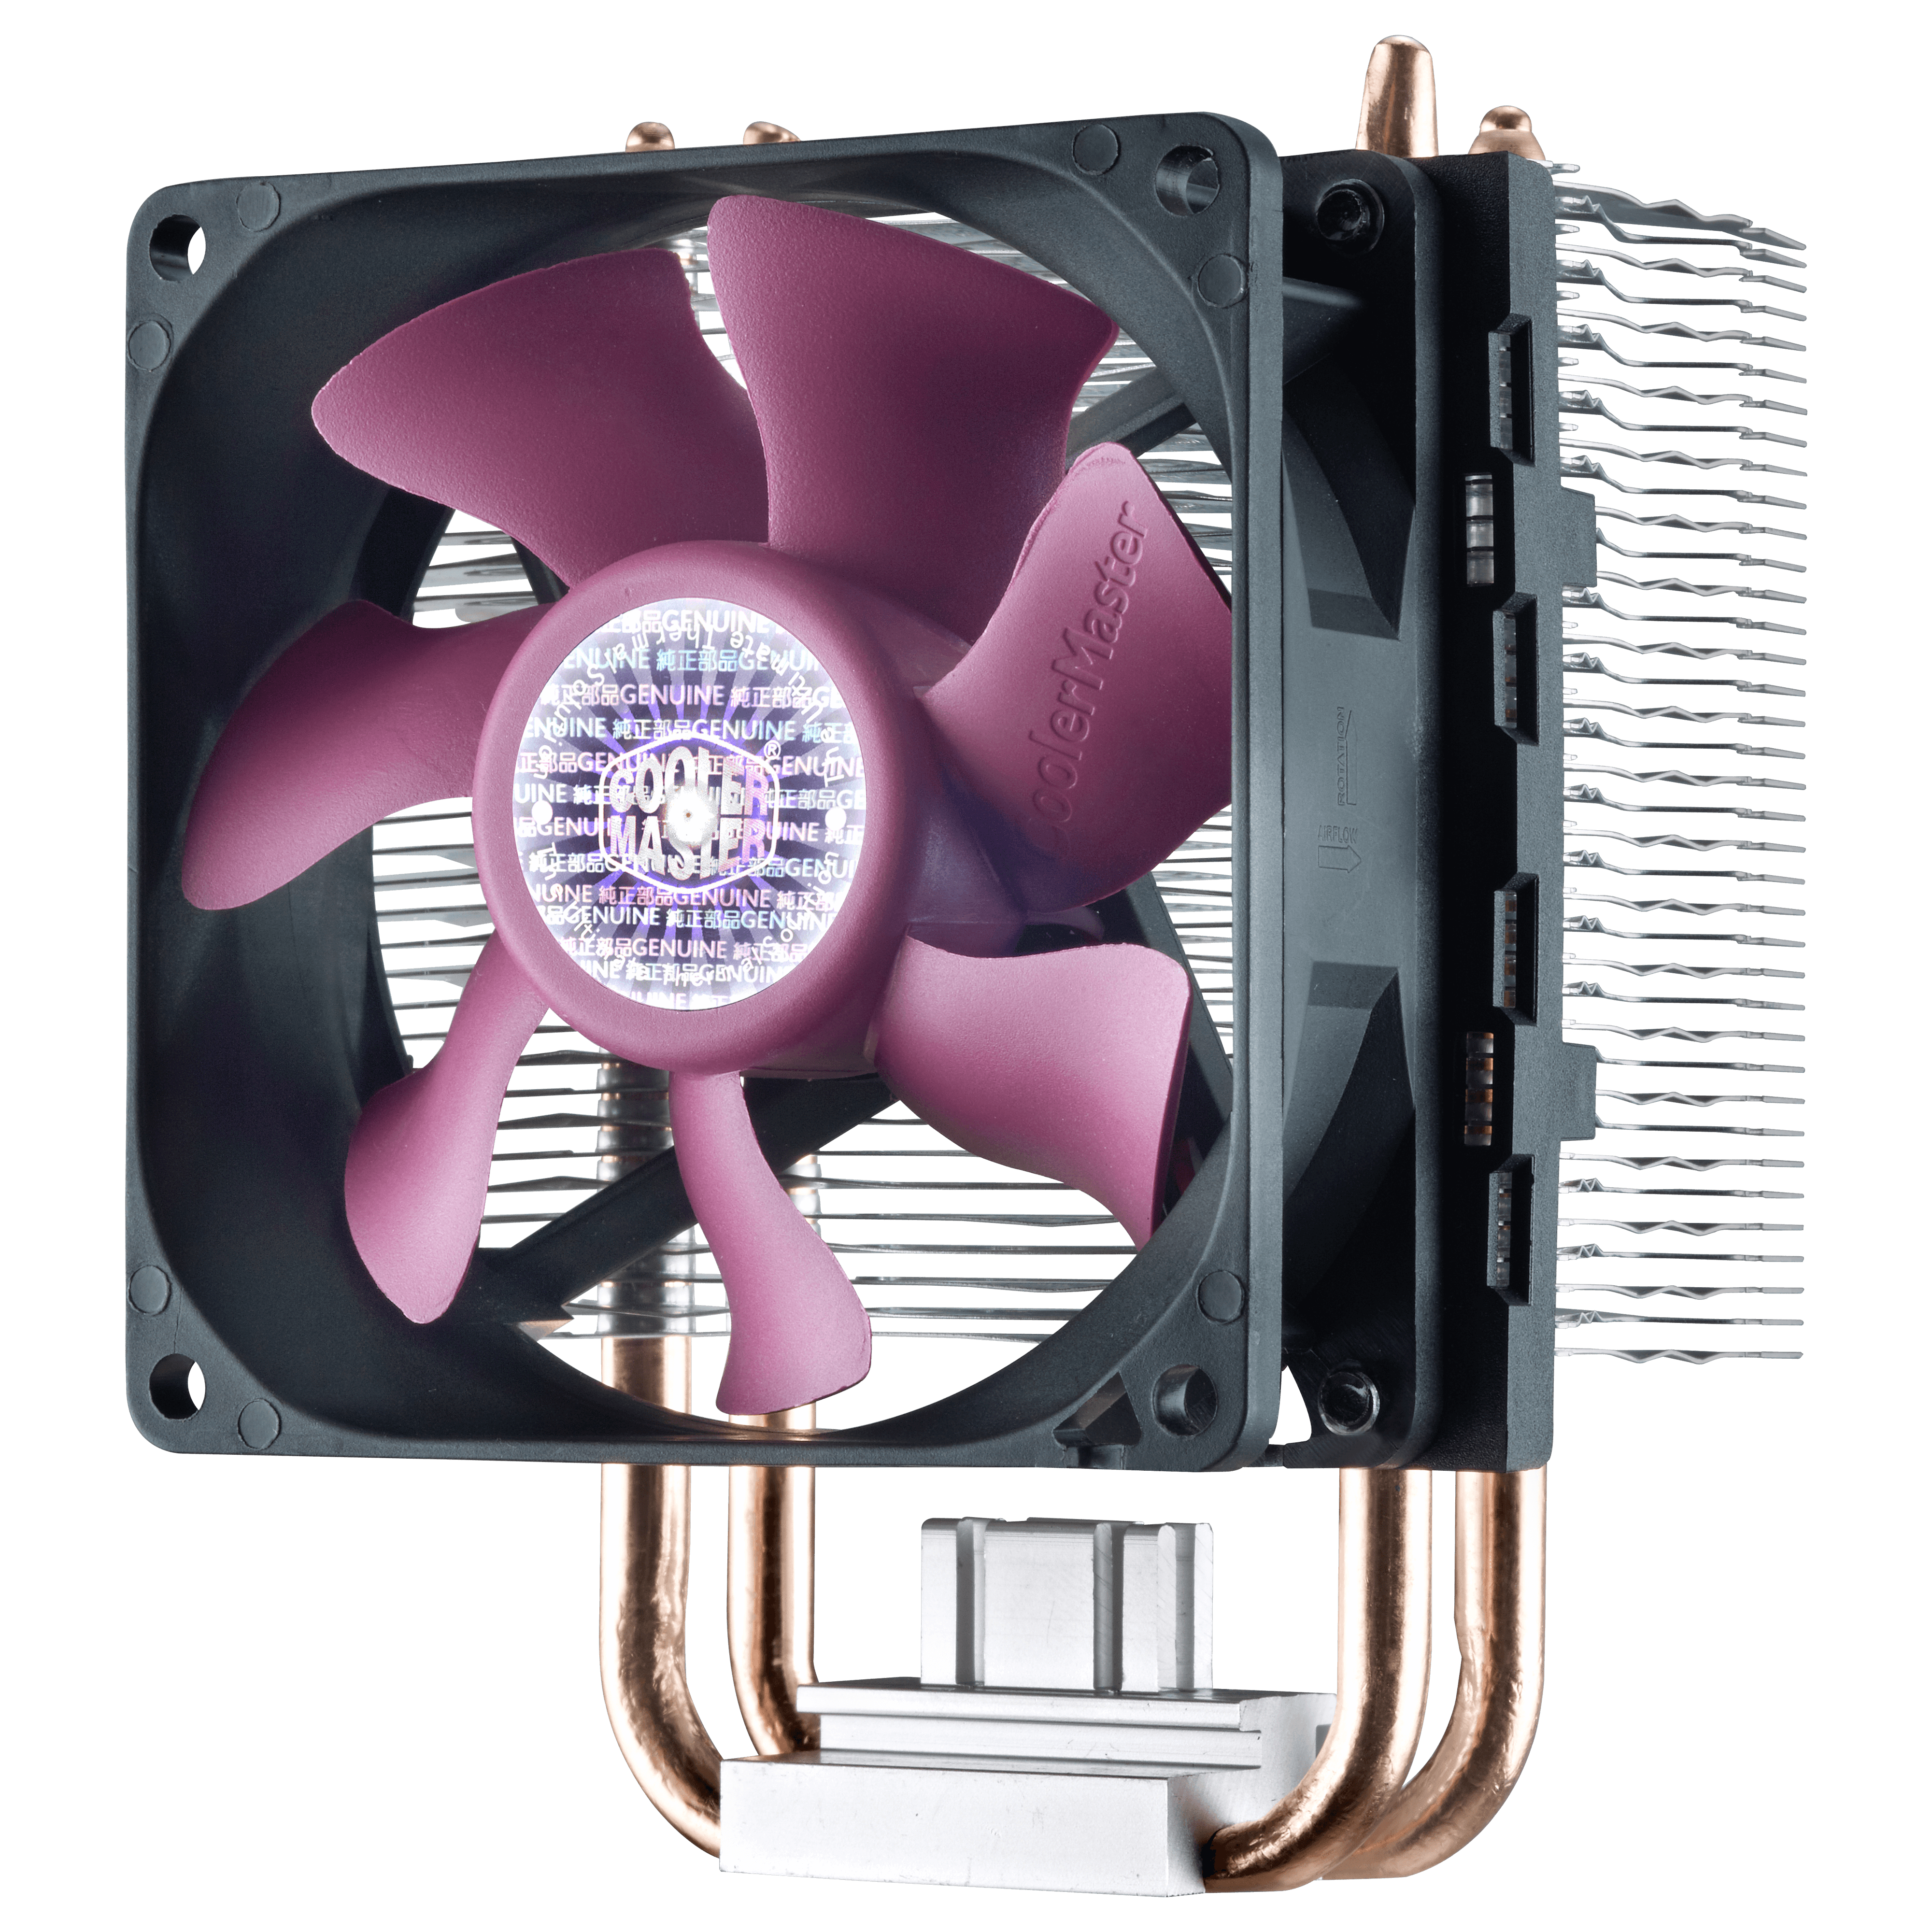 Кулер max. Cooler Master t20 (New). Blizzard t220. Versa h17 Max Cooler height. COOREL MAXPOWER output 2000w.